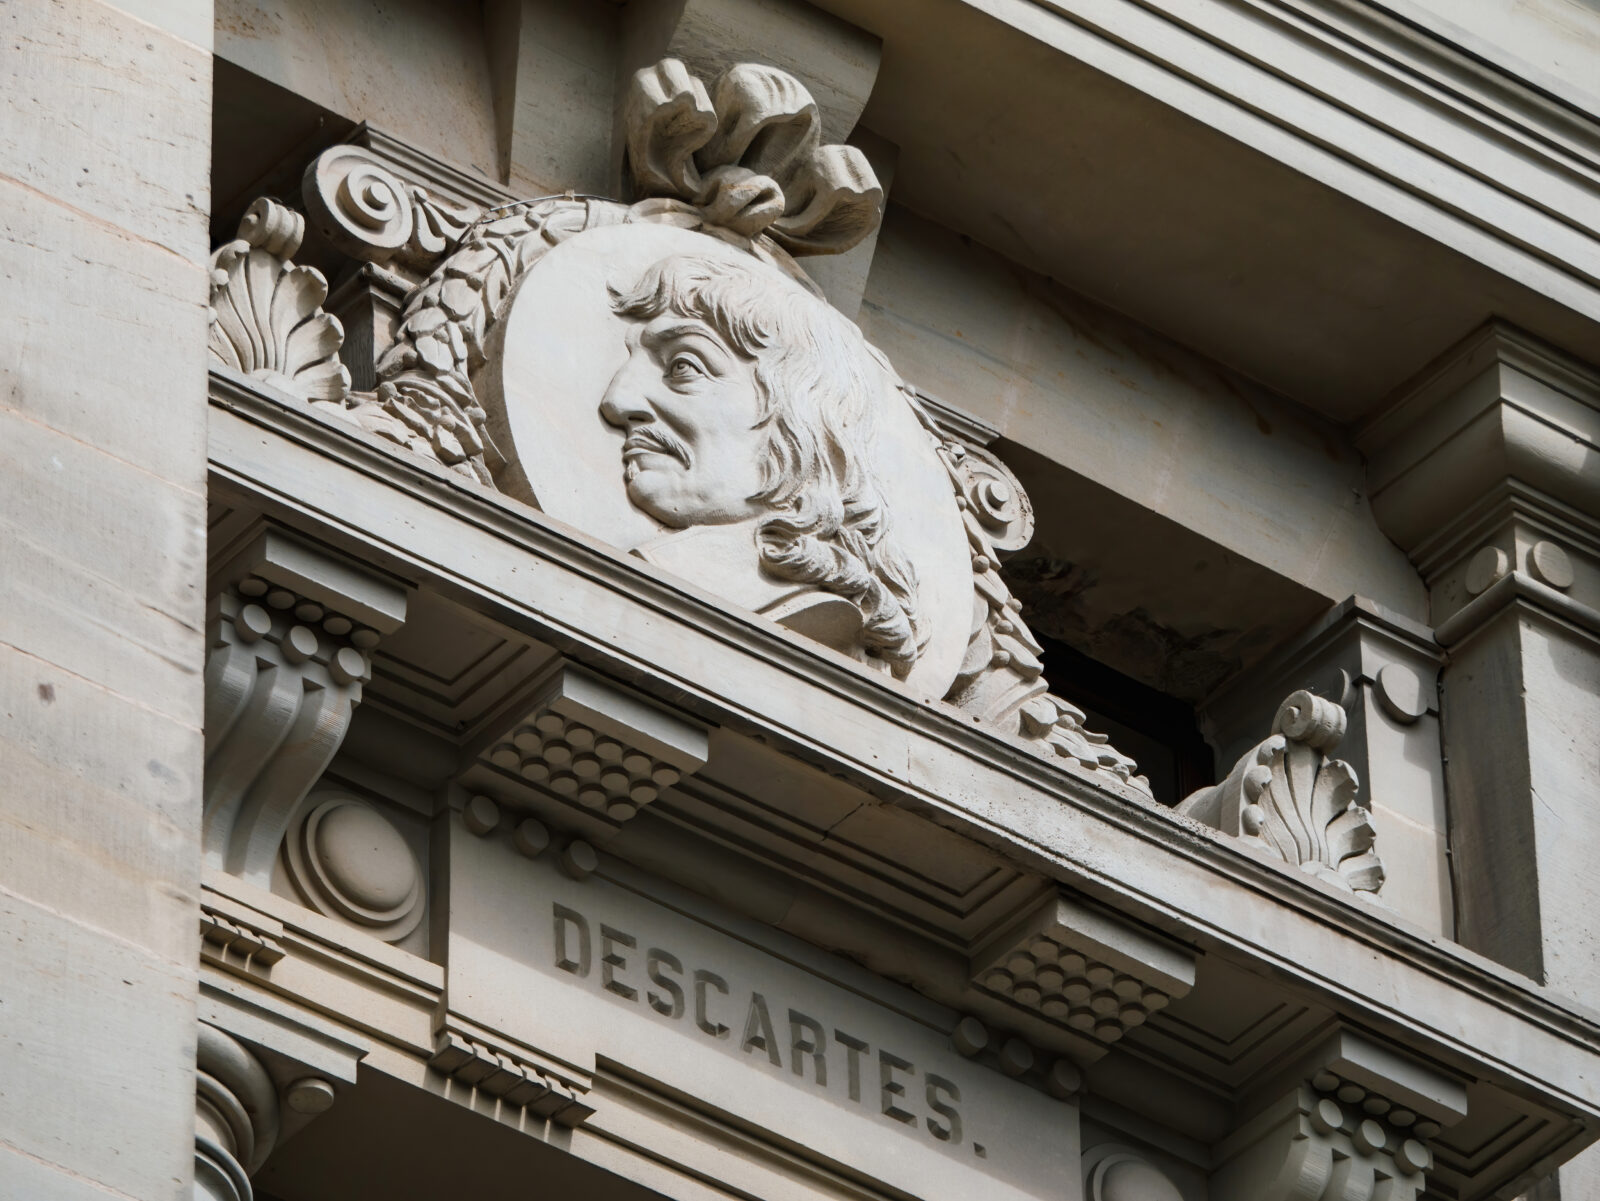 A low angle view of a statue of Rene Descartes against the historic building exterior, showcasing its intricate architecture and craftsmanship.